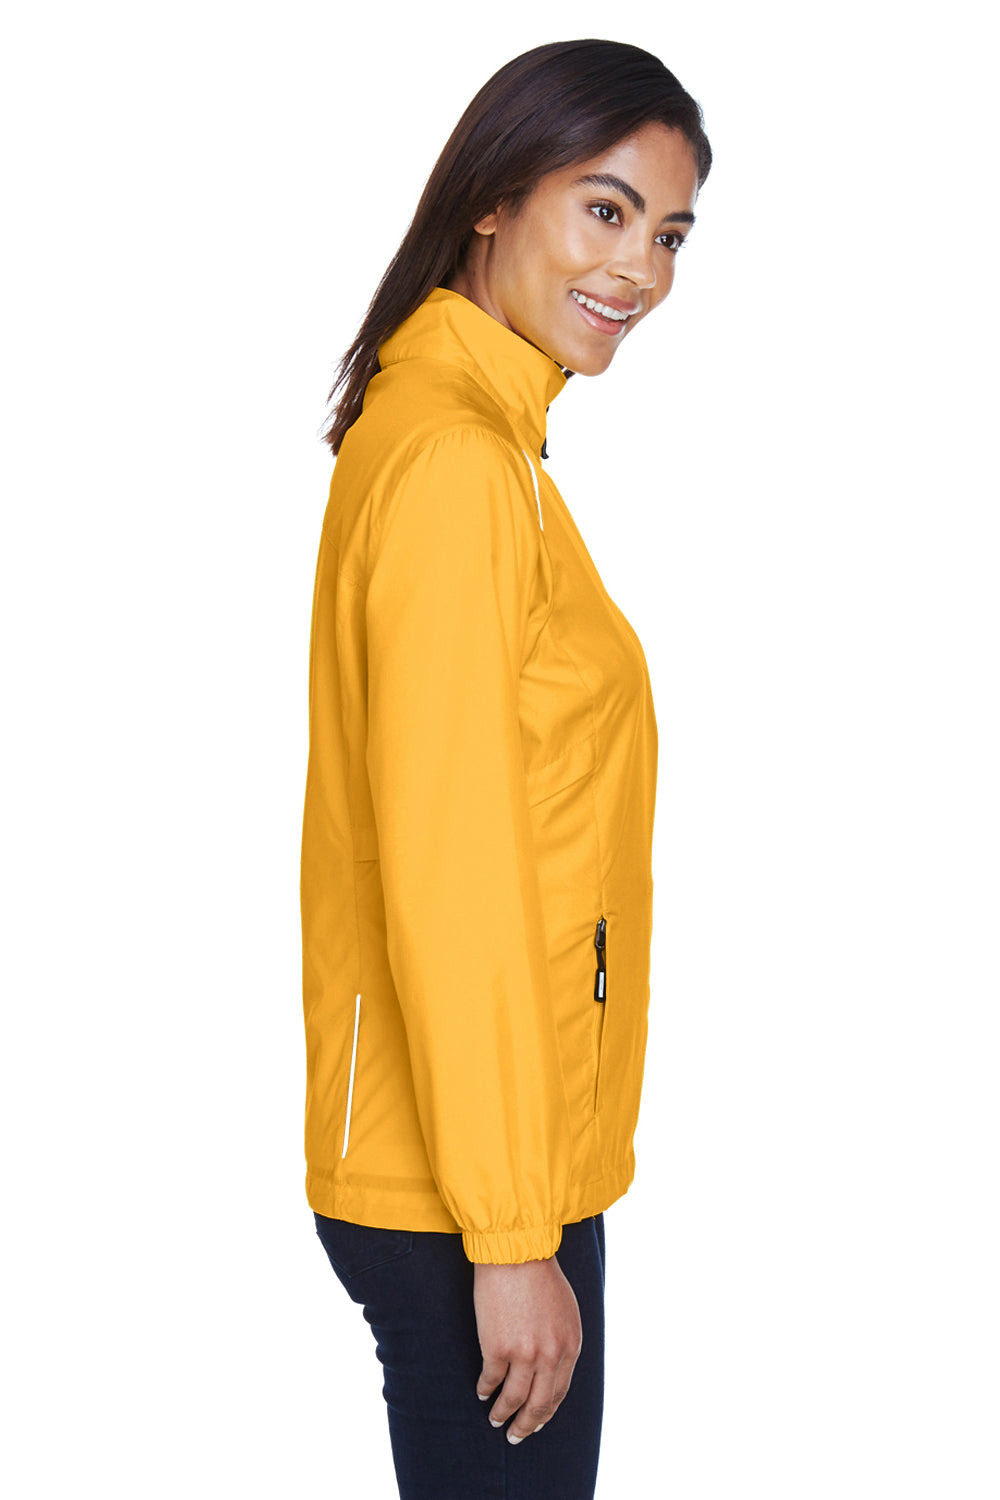 Core 365 78183 Womens Motivate Water Resistant Full Zip Jacket Gold Side